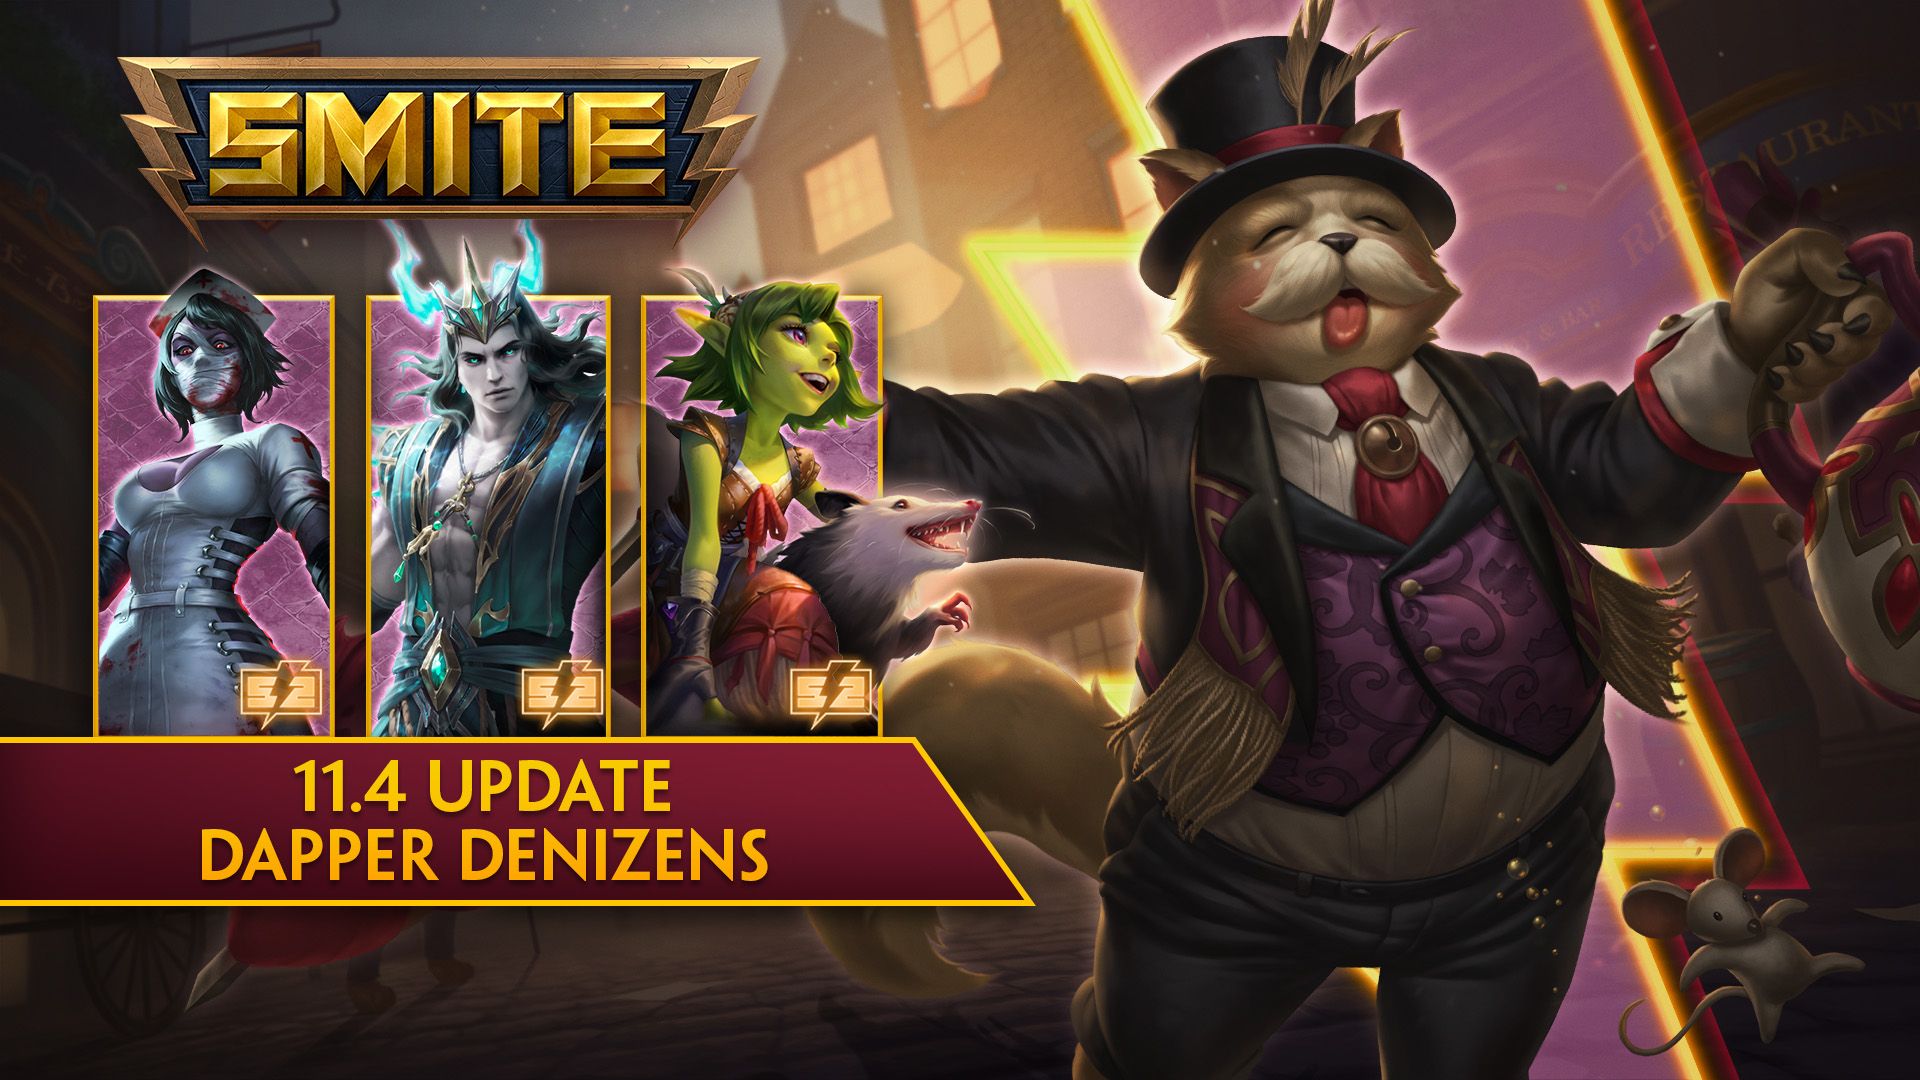 The available skins in Smite's Dapper Denizens Event